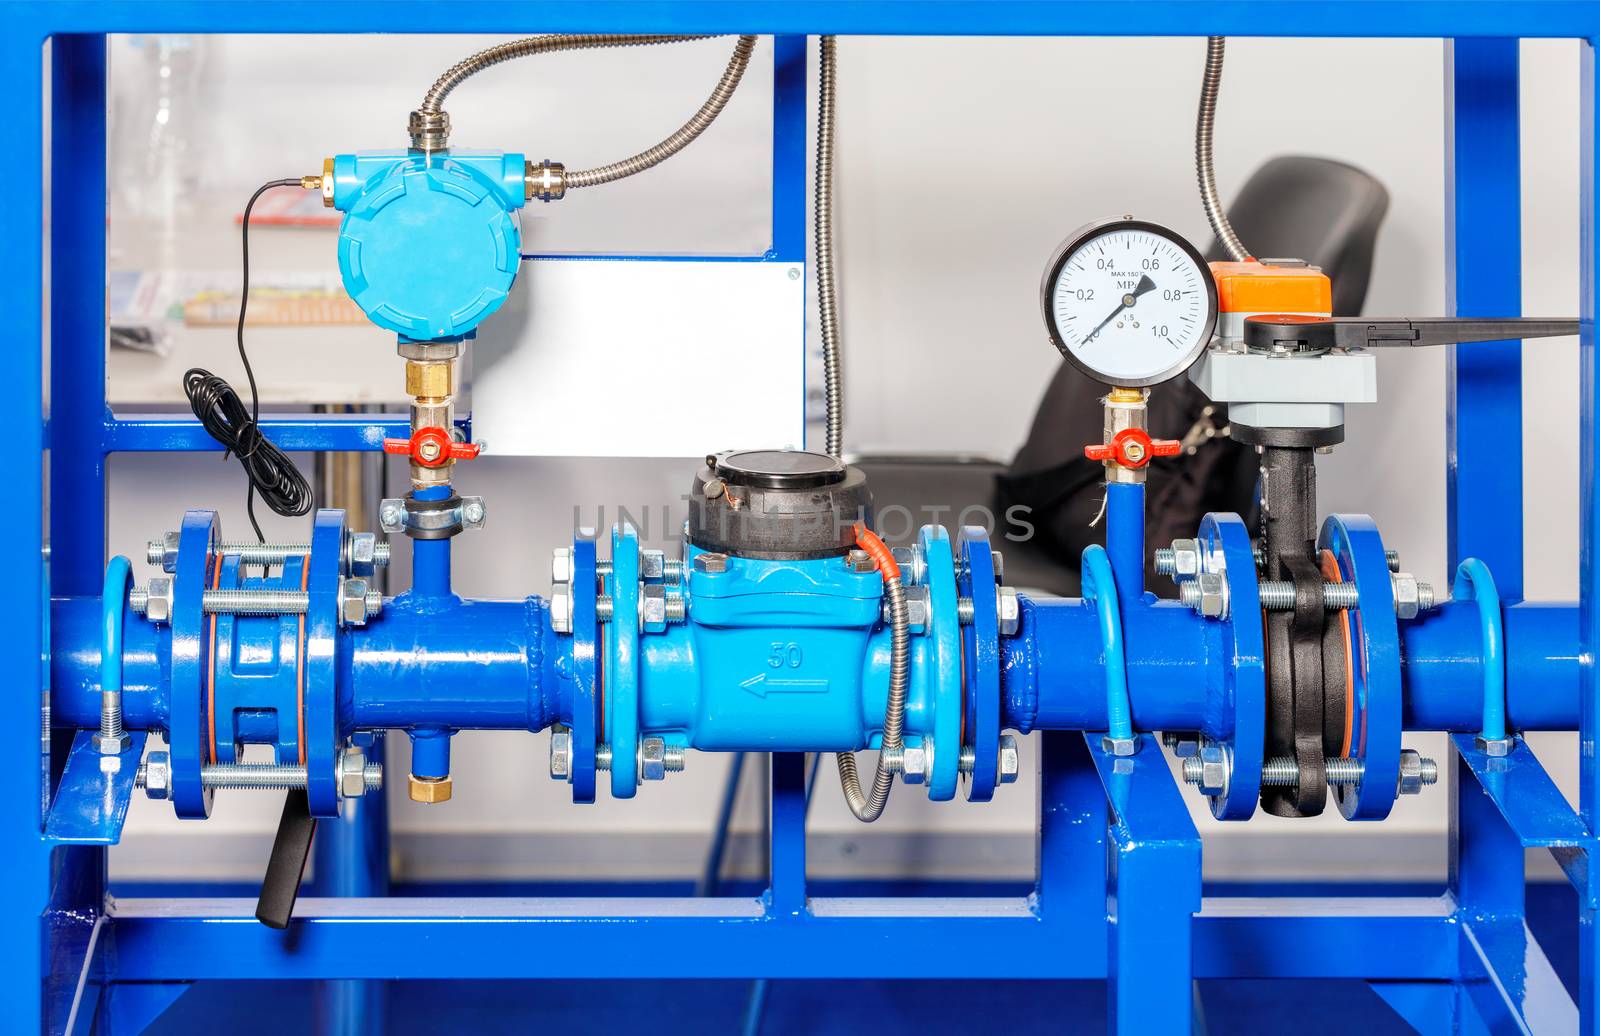 Installation of the water metering and pressure system assembly, close-up of manometers, pipes and taps, copy space.